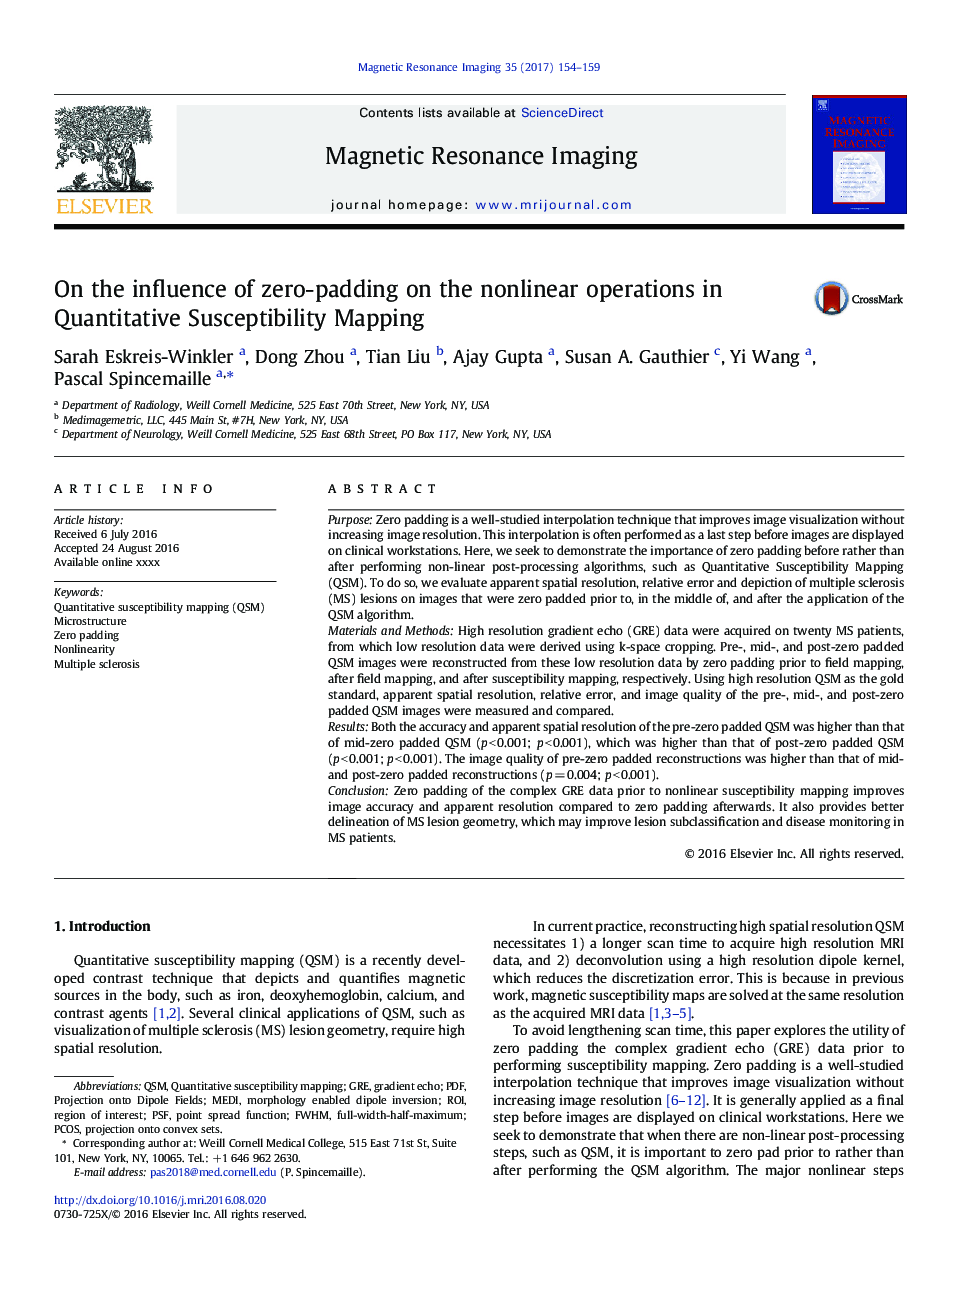 On the influence of zero-padding on the nonlinear operations in Quantitative Susceptibility Mapping